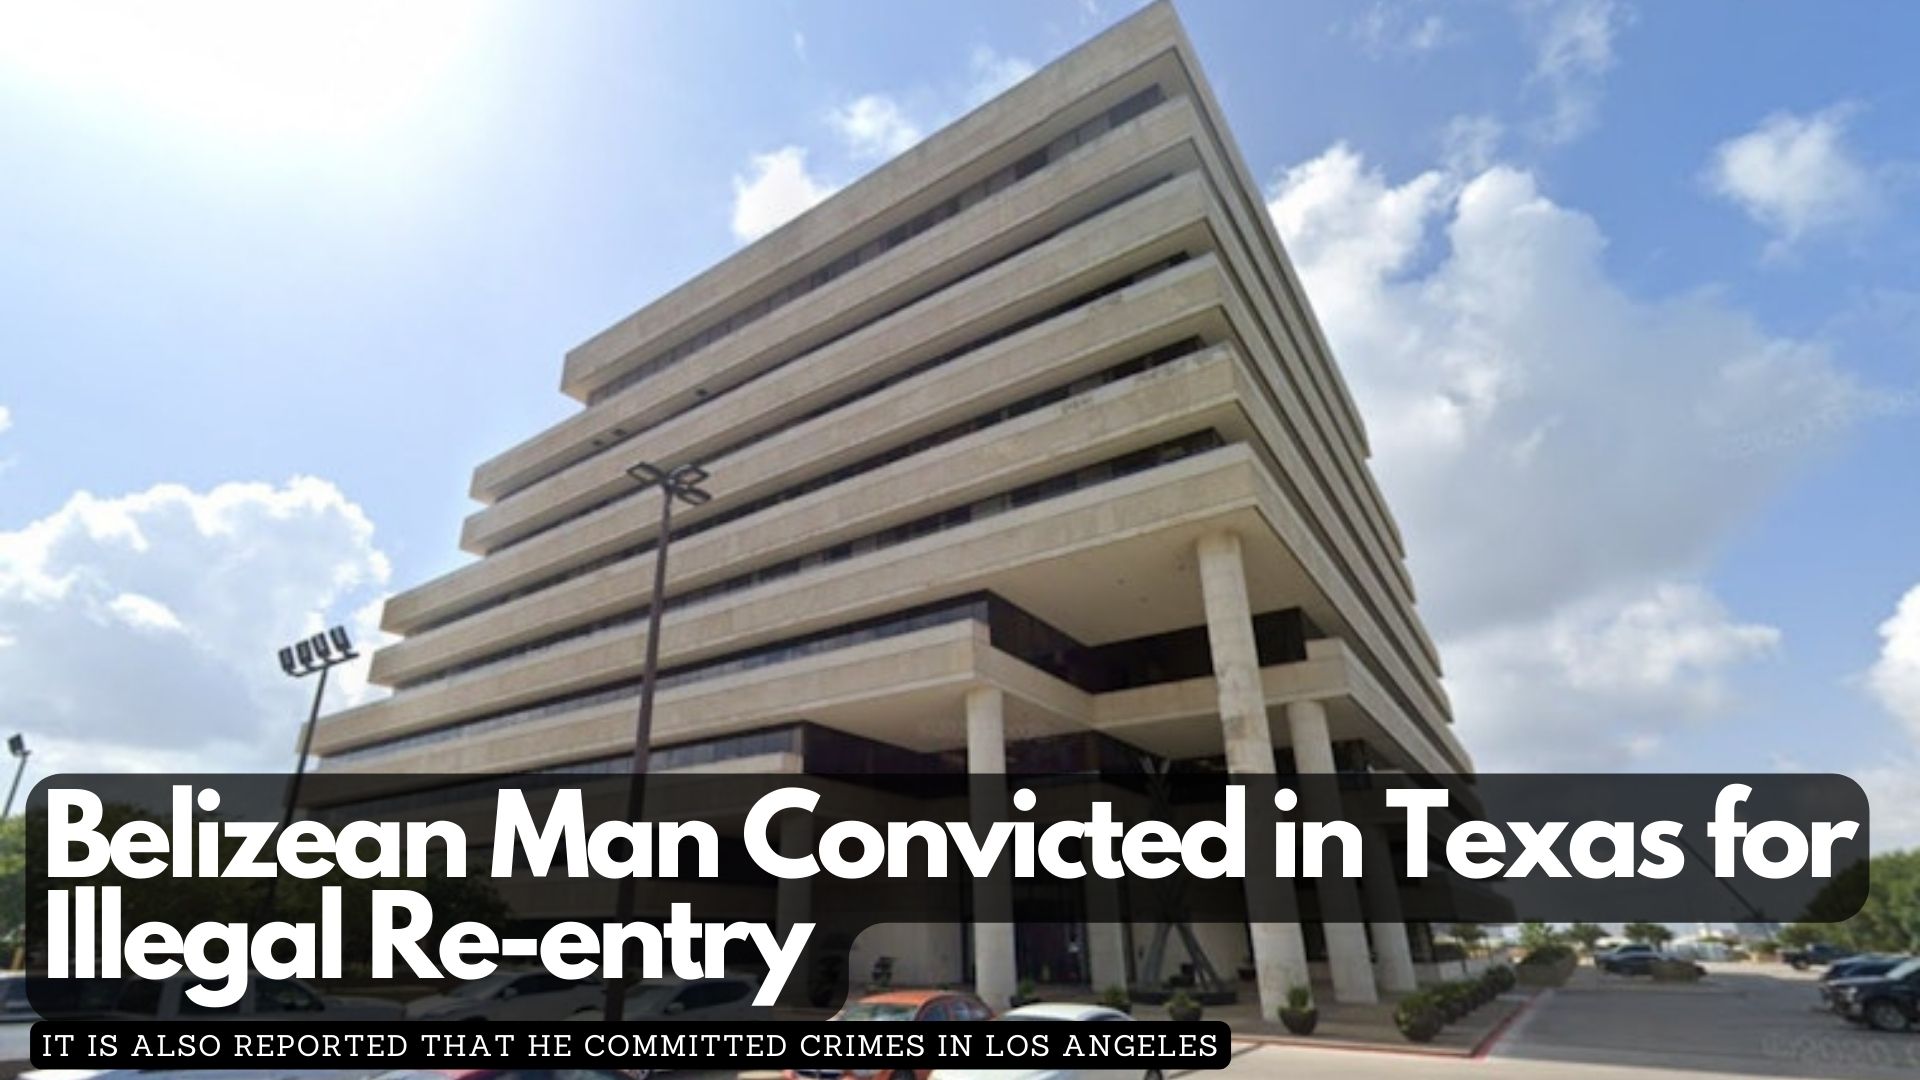 Belizean Man Convicted in Texas for Illegal Re-entry